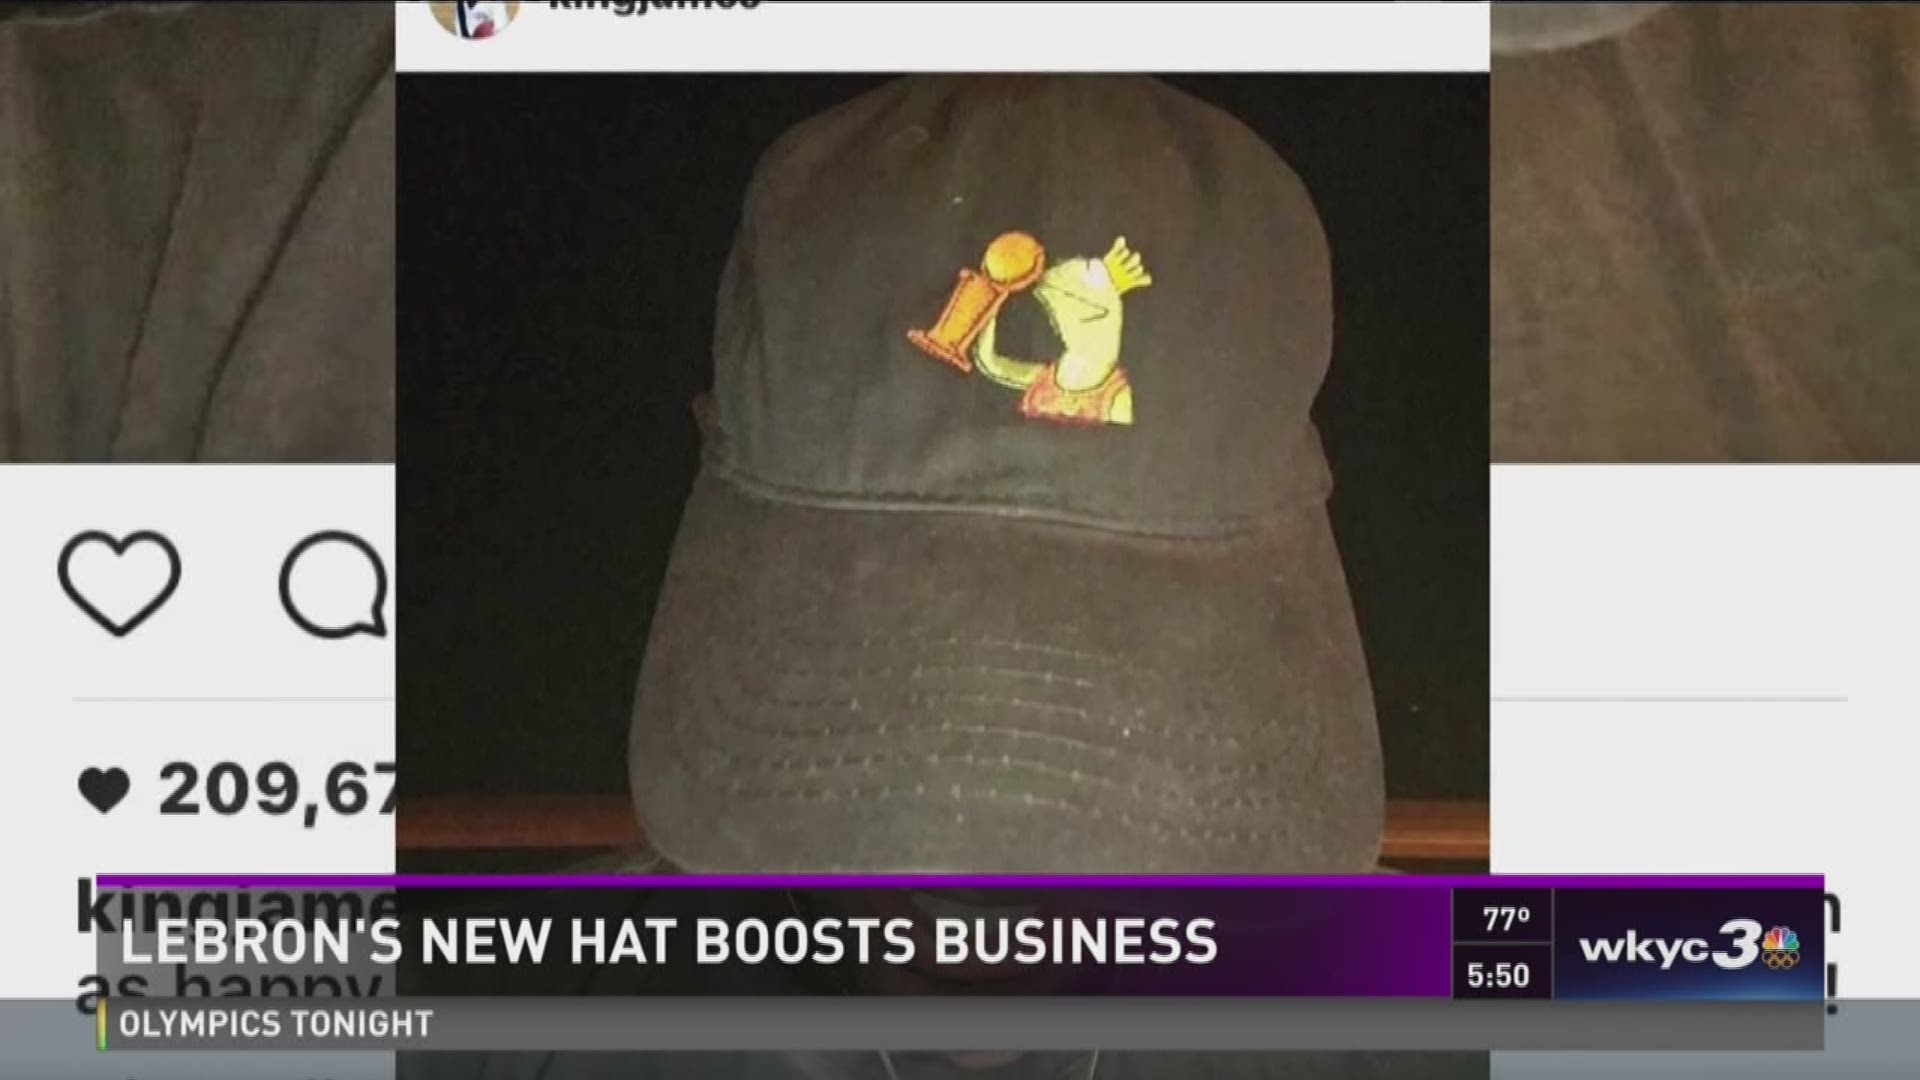 LeBron's new hat boosts business